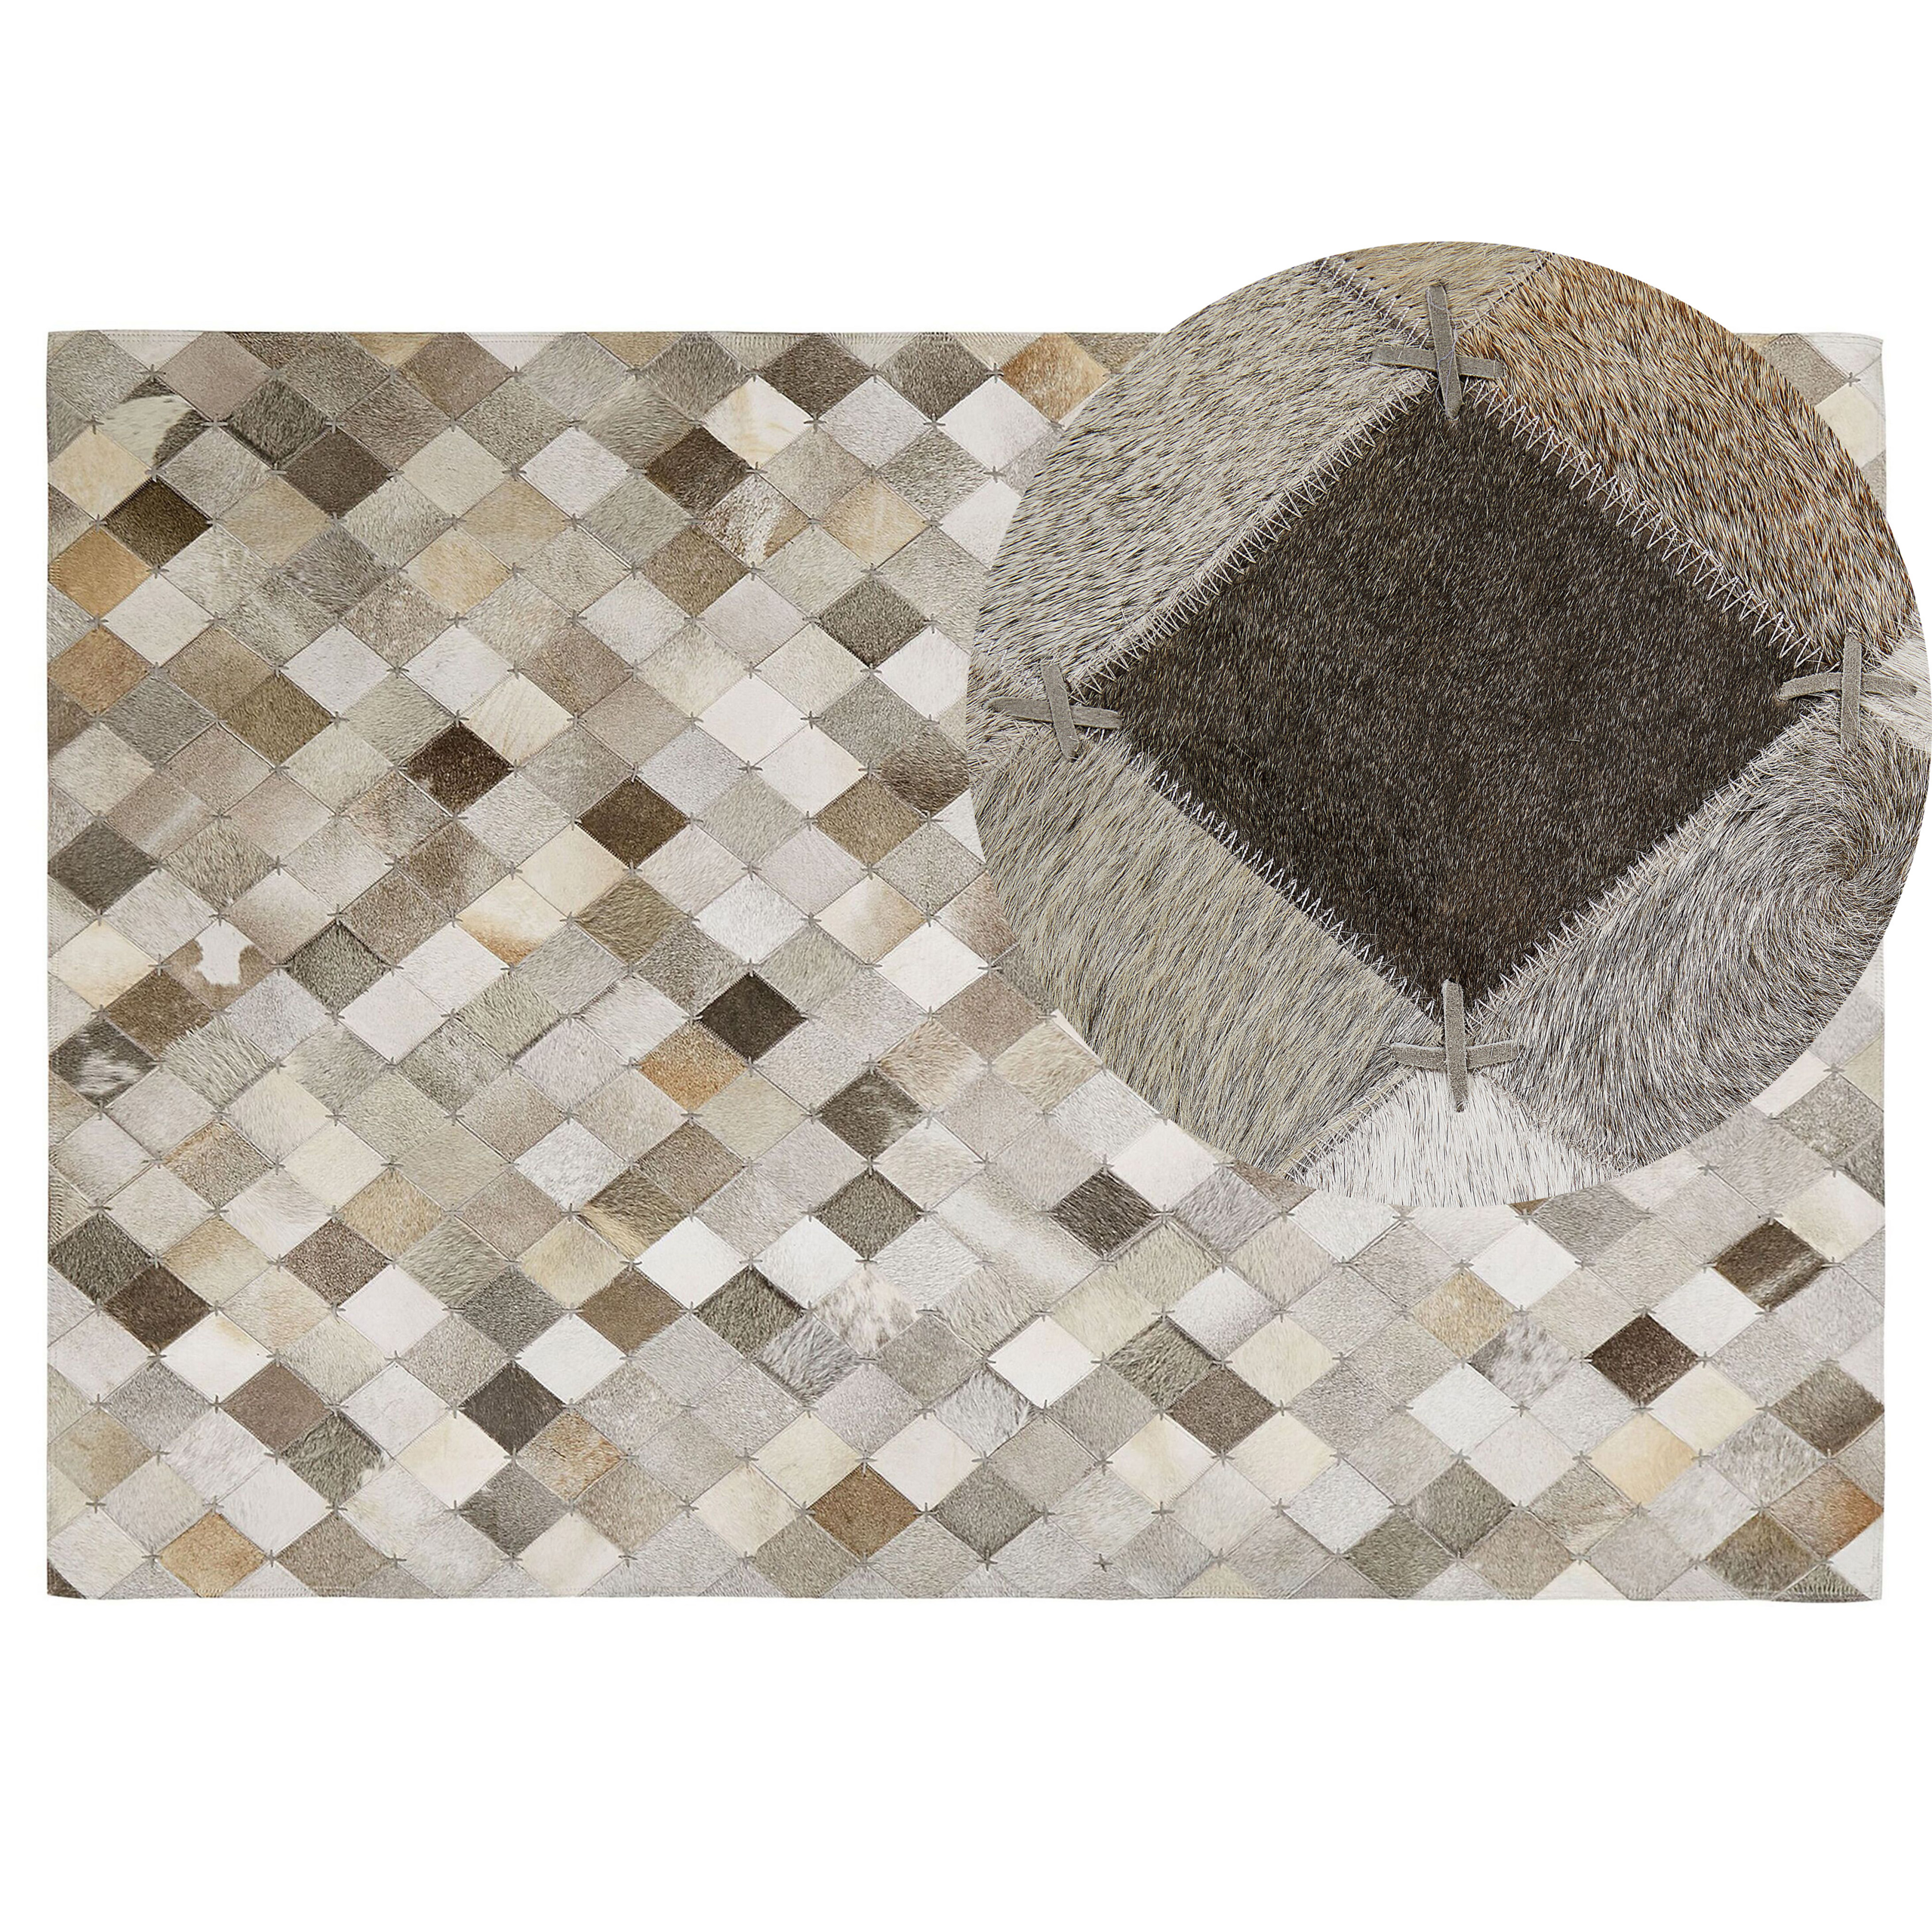 Beliani Area Rug Grey and Brown Cowhide Leather 140 x 200 cm Handcrafted Patchwork Modern Boho